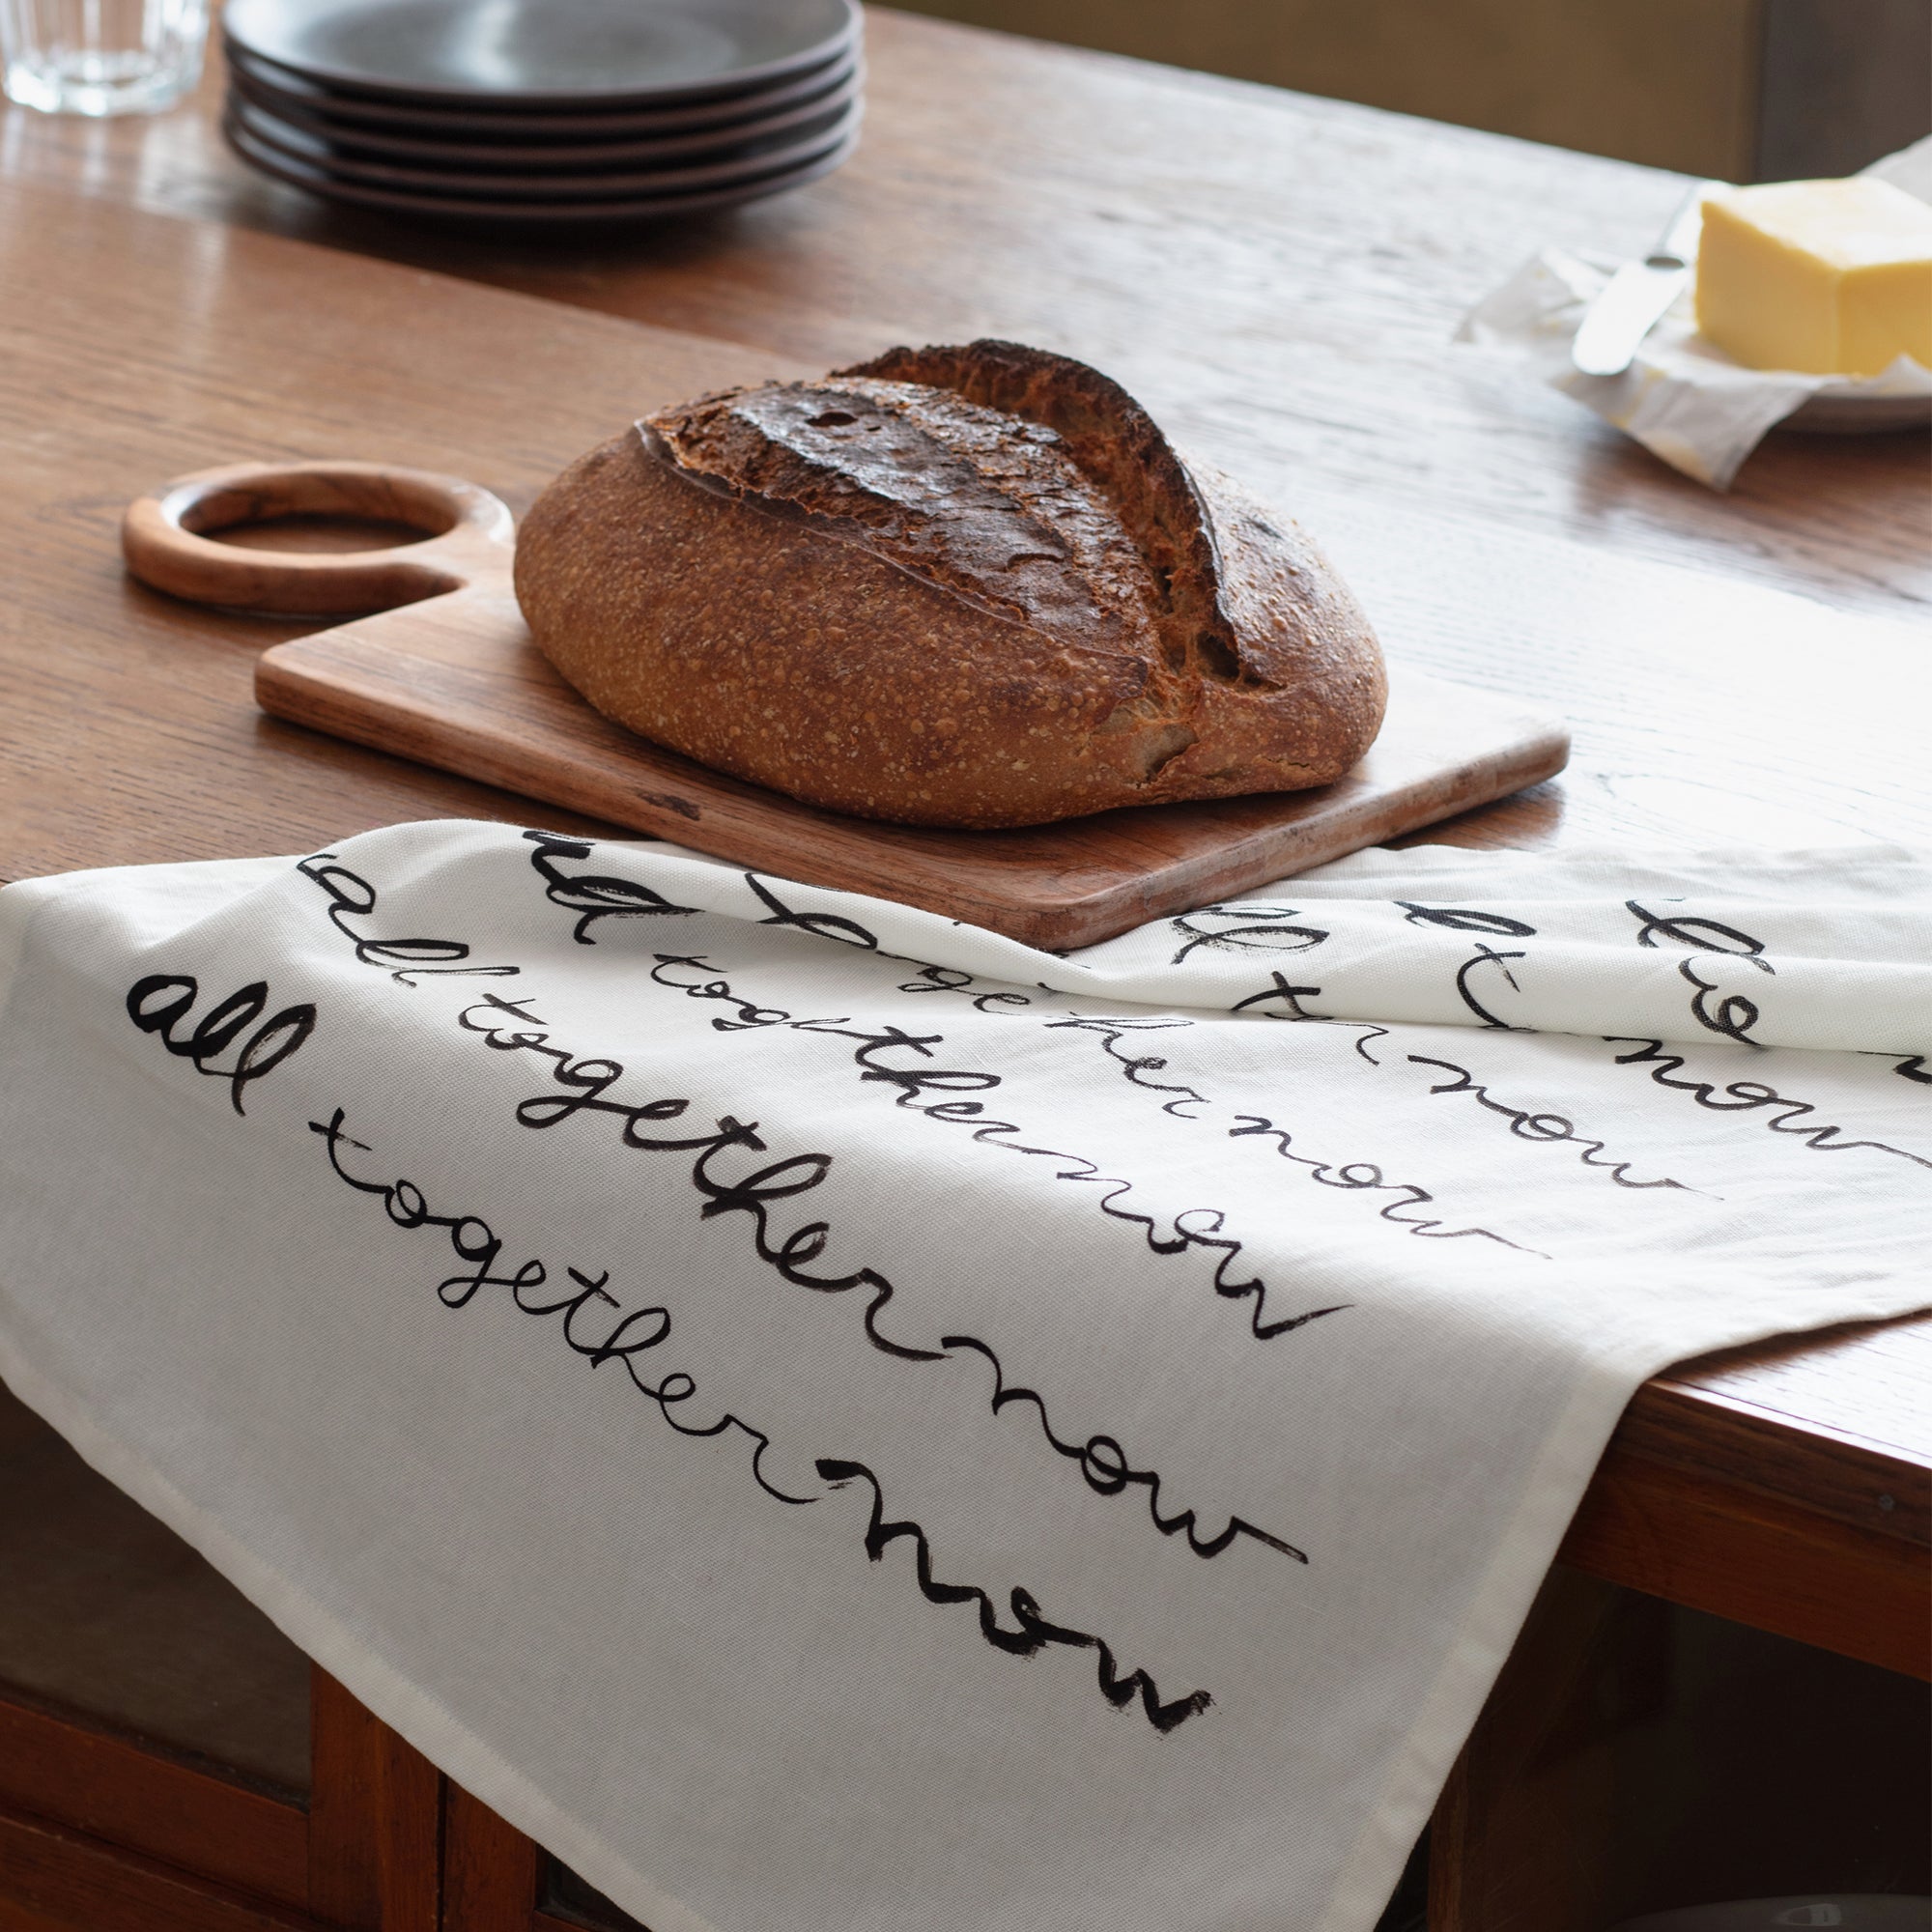 Cotton Tea Towel - All Together Now